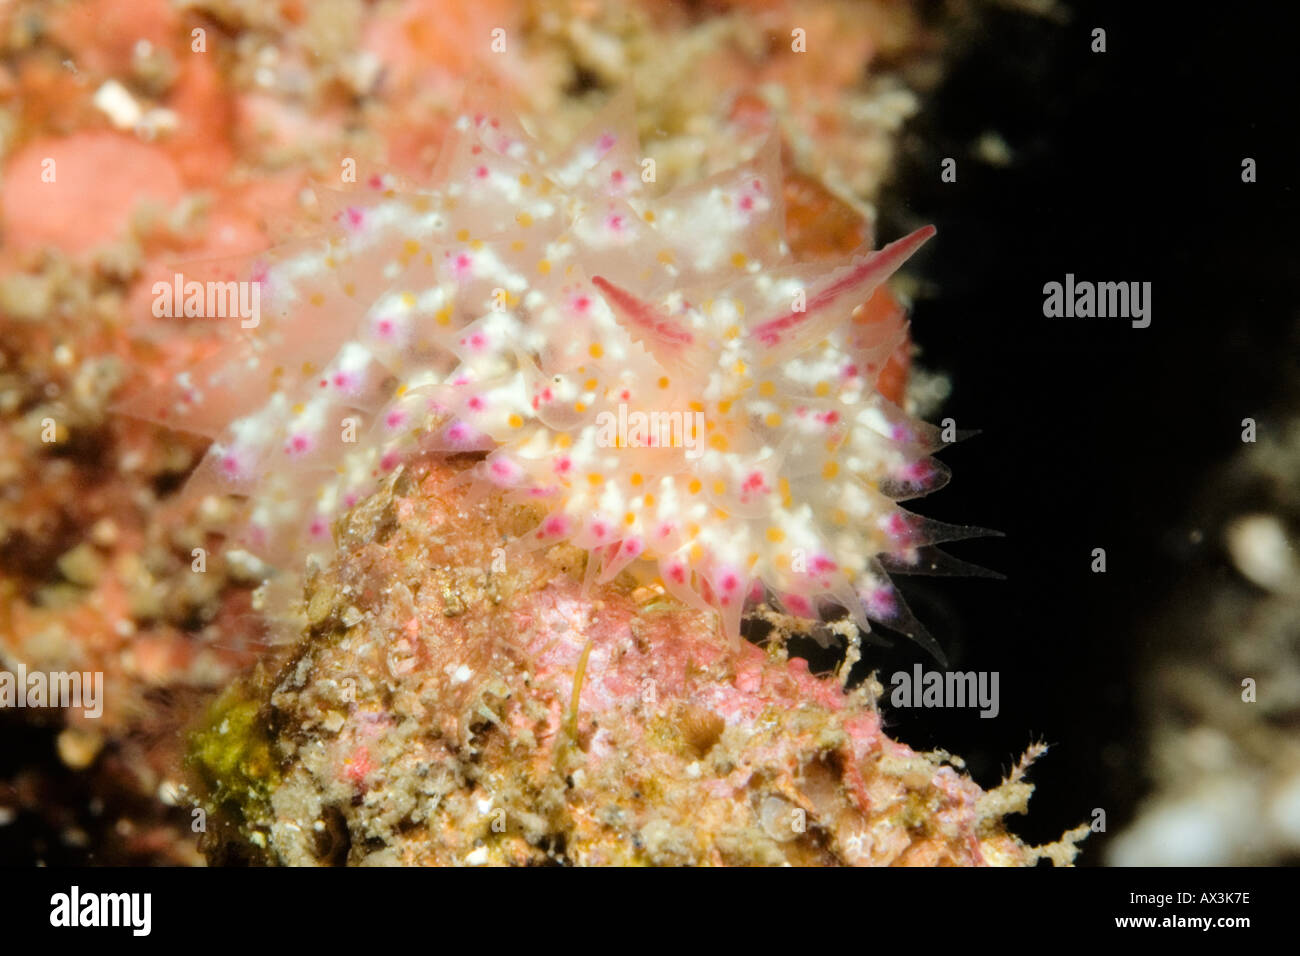 Janolus sp nudibranch in Lembeh Straits Indonesia Stock Photo